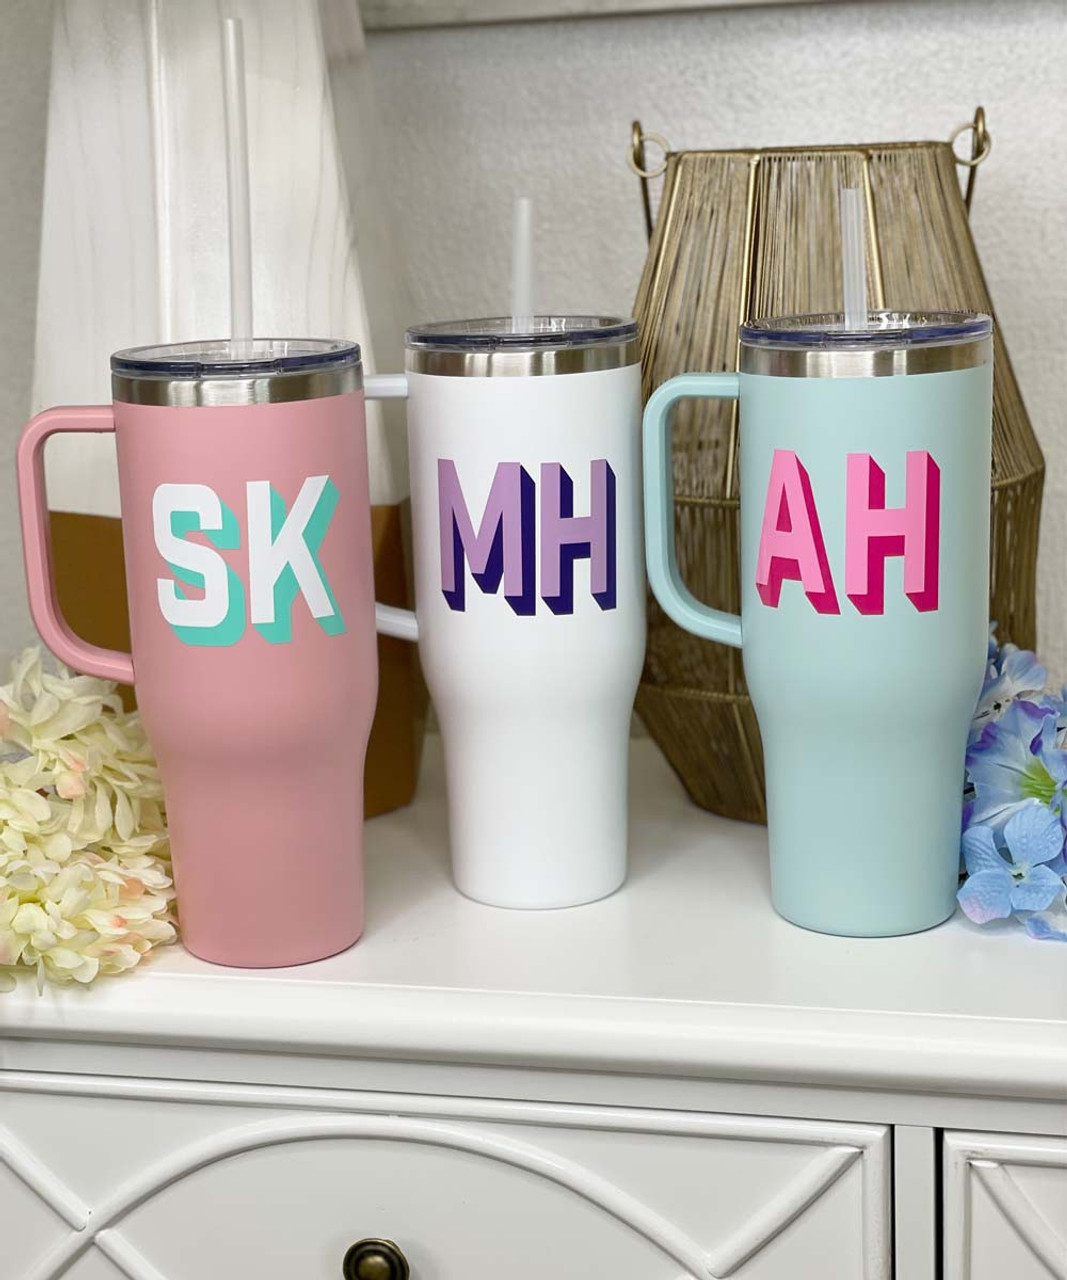 https://cdn11.bigcommerce.com/s-rrje11zjnk/images/stencil/1280x1280/products/33858/73193/shadow-block-monogrammed-40-oz-tumbler-with-handle__72018.1675387095.jpg?c=1